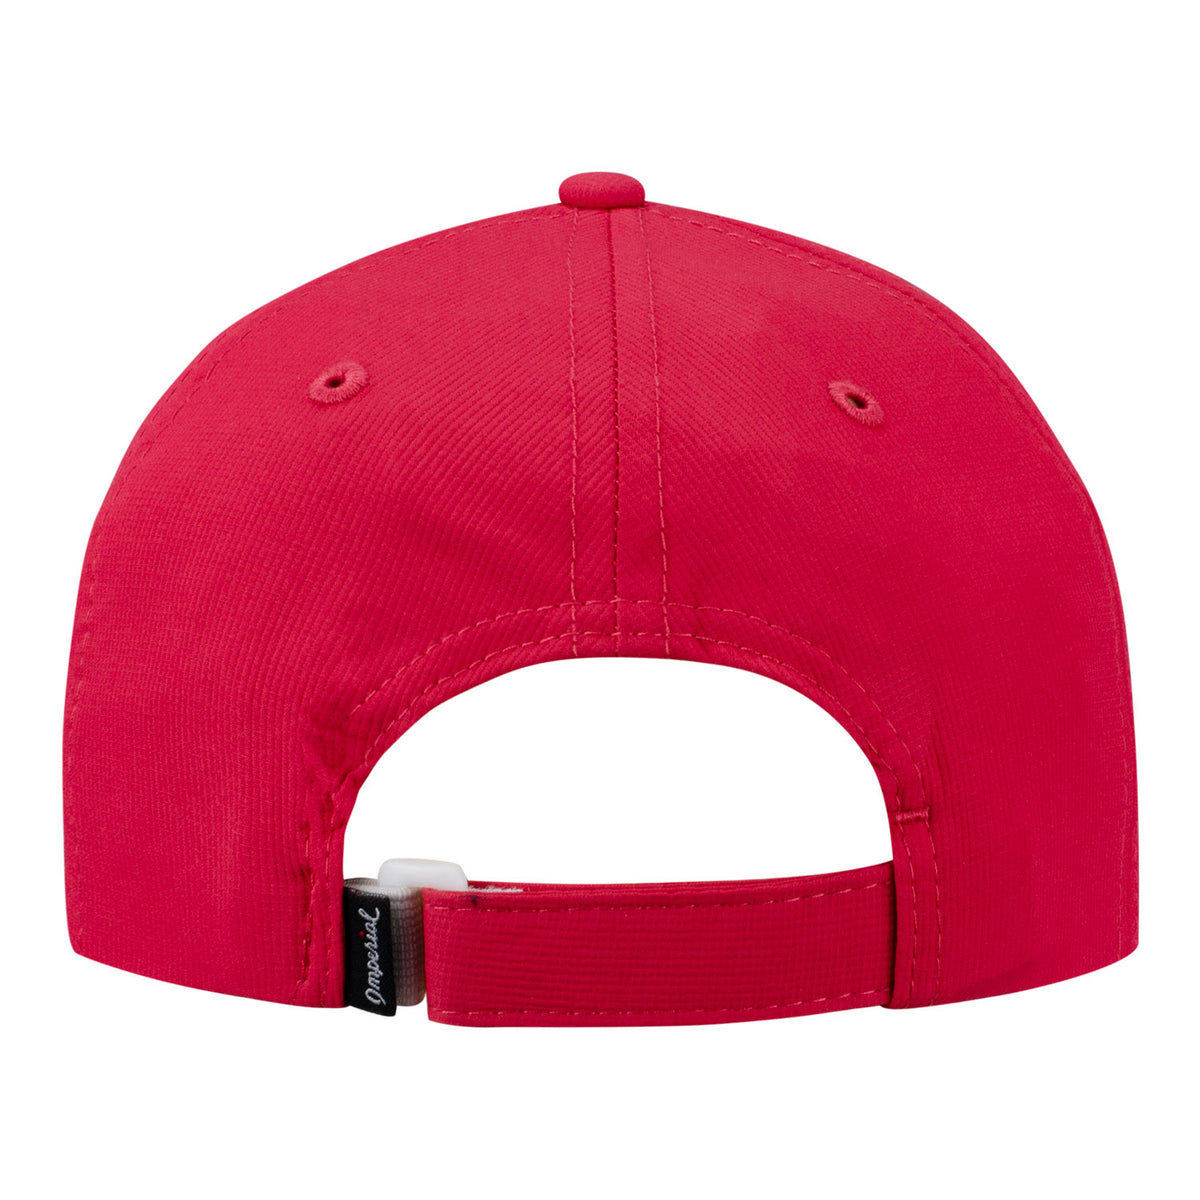 Imperial 2025 Ryder Cup Original Performance Hat in Nantucket Red - Back View